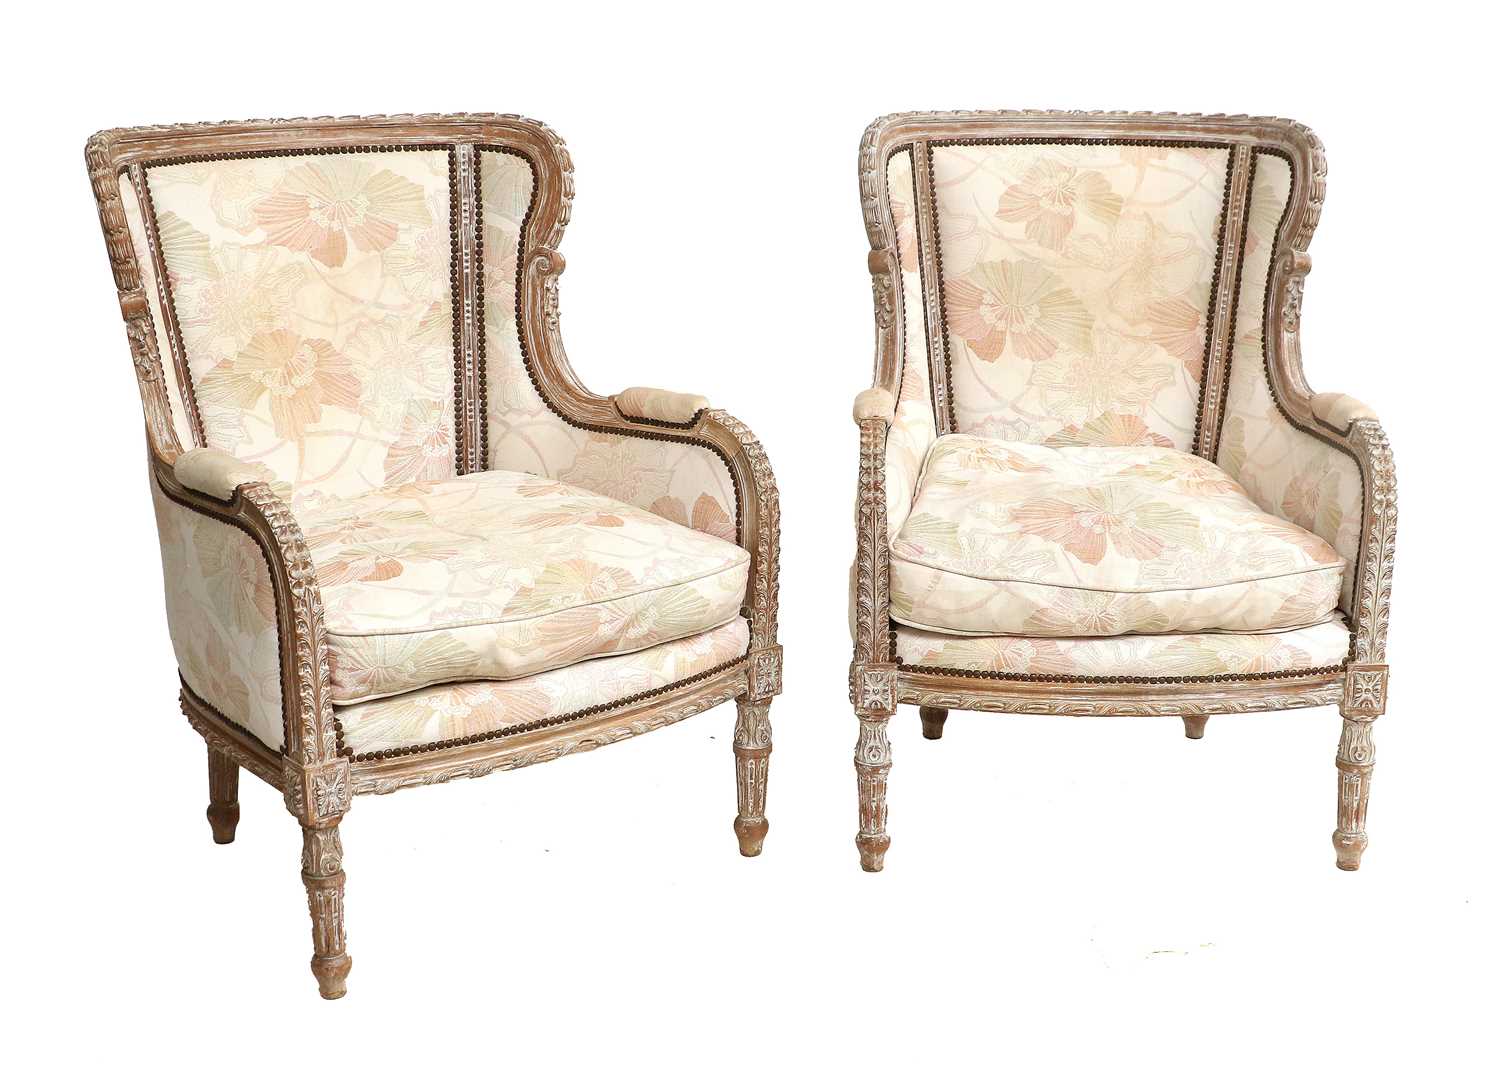 A Pair of 20th Century Upholstered Close-Nailed Armchairs, with limed wood show frames, covered in